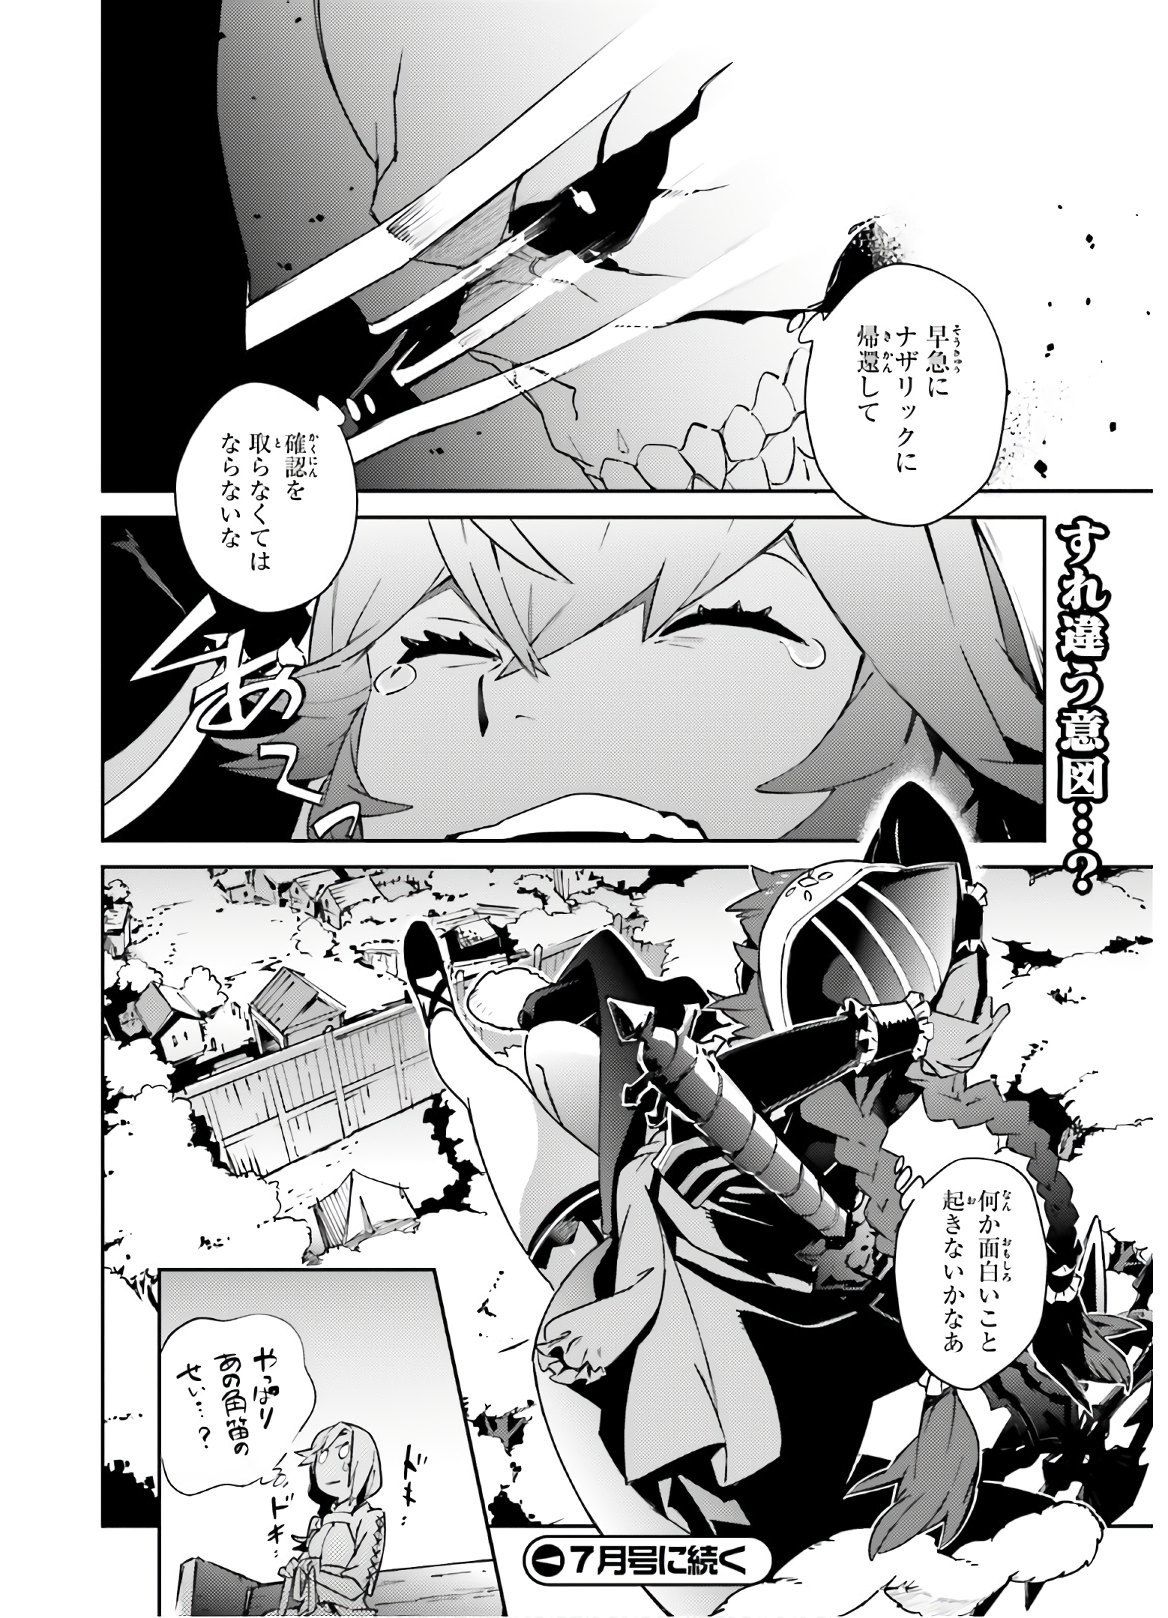 Overlord - Chapter 56 - Page 36